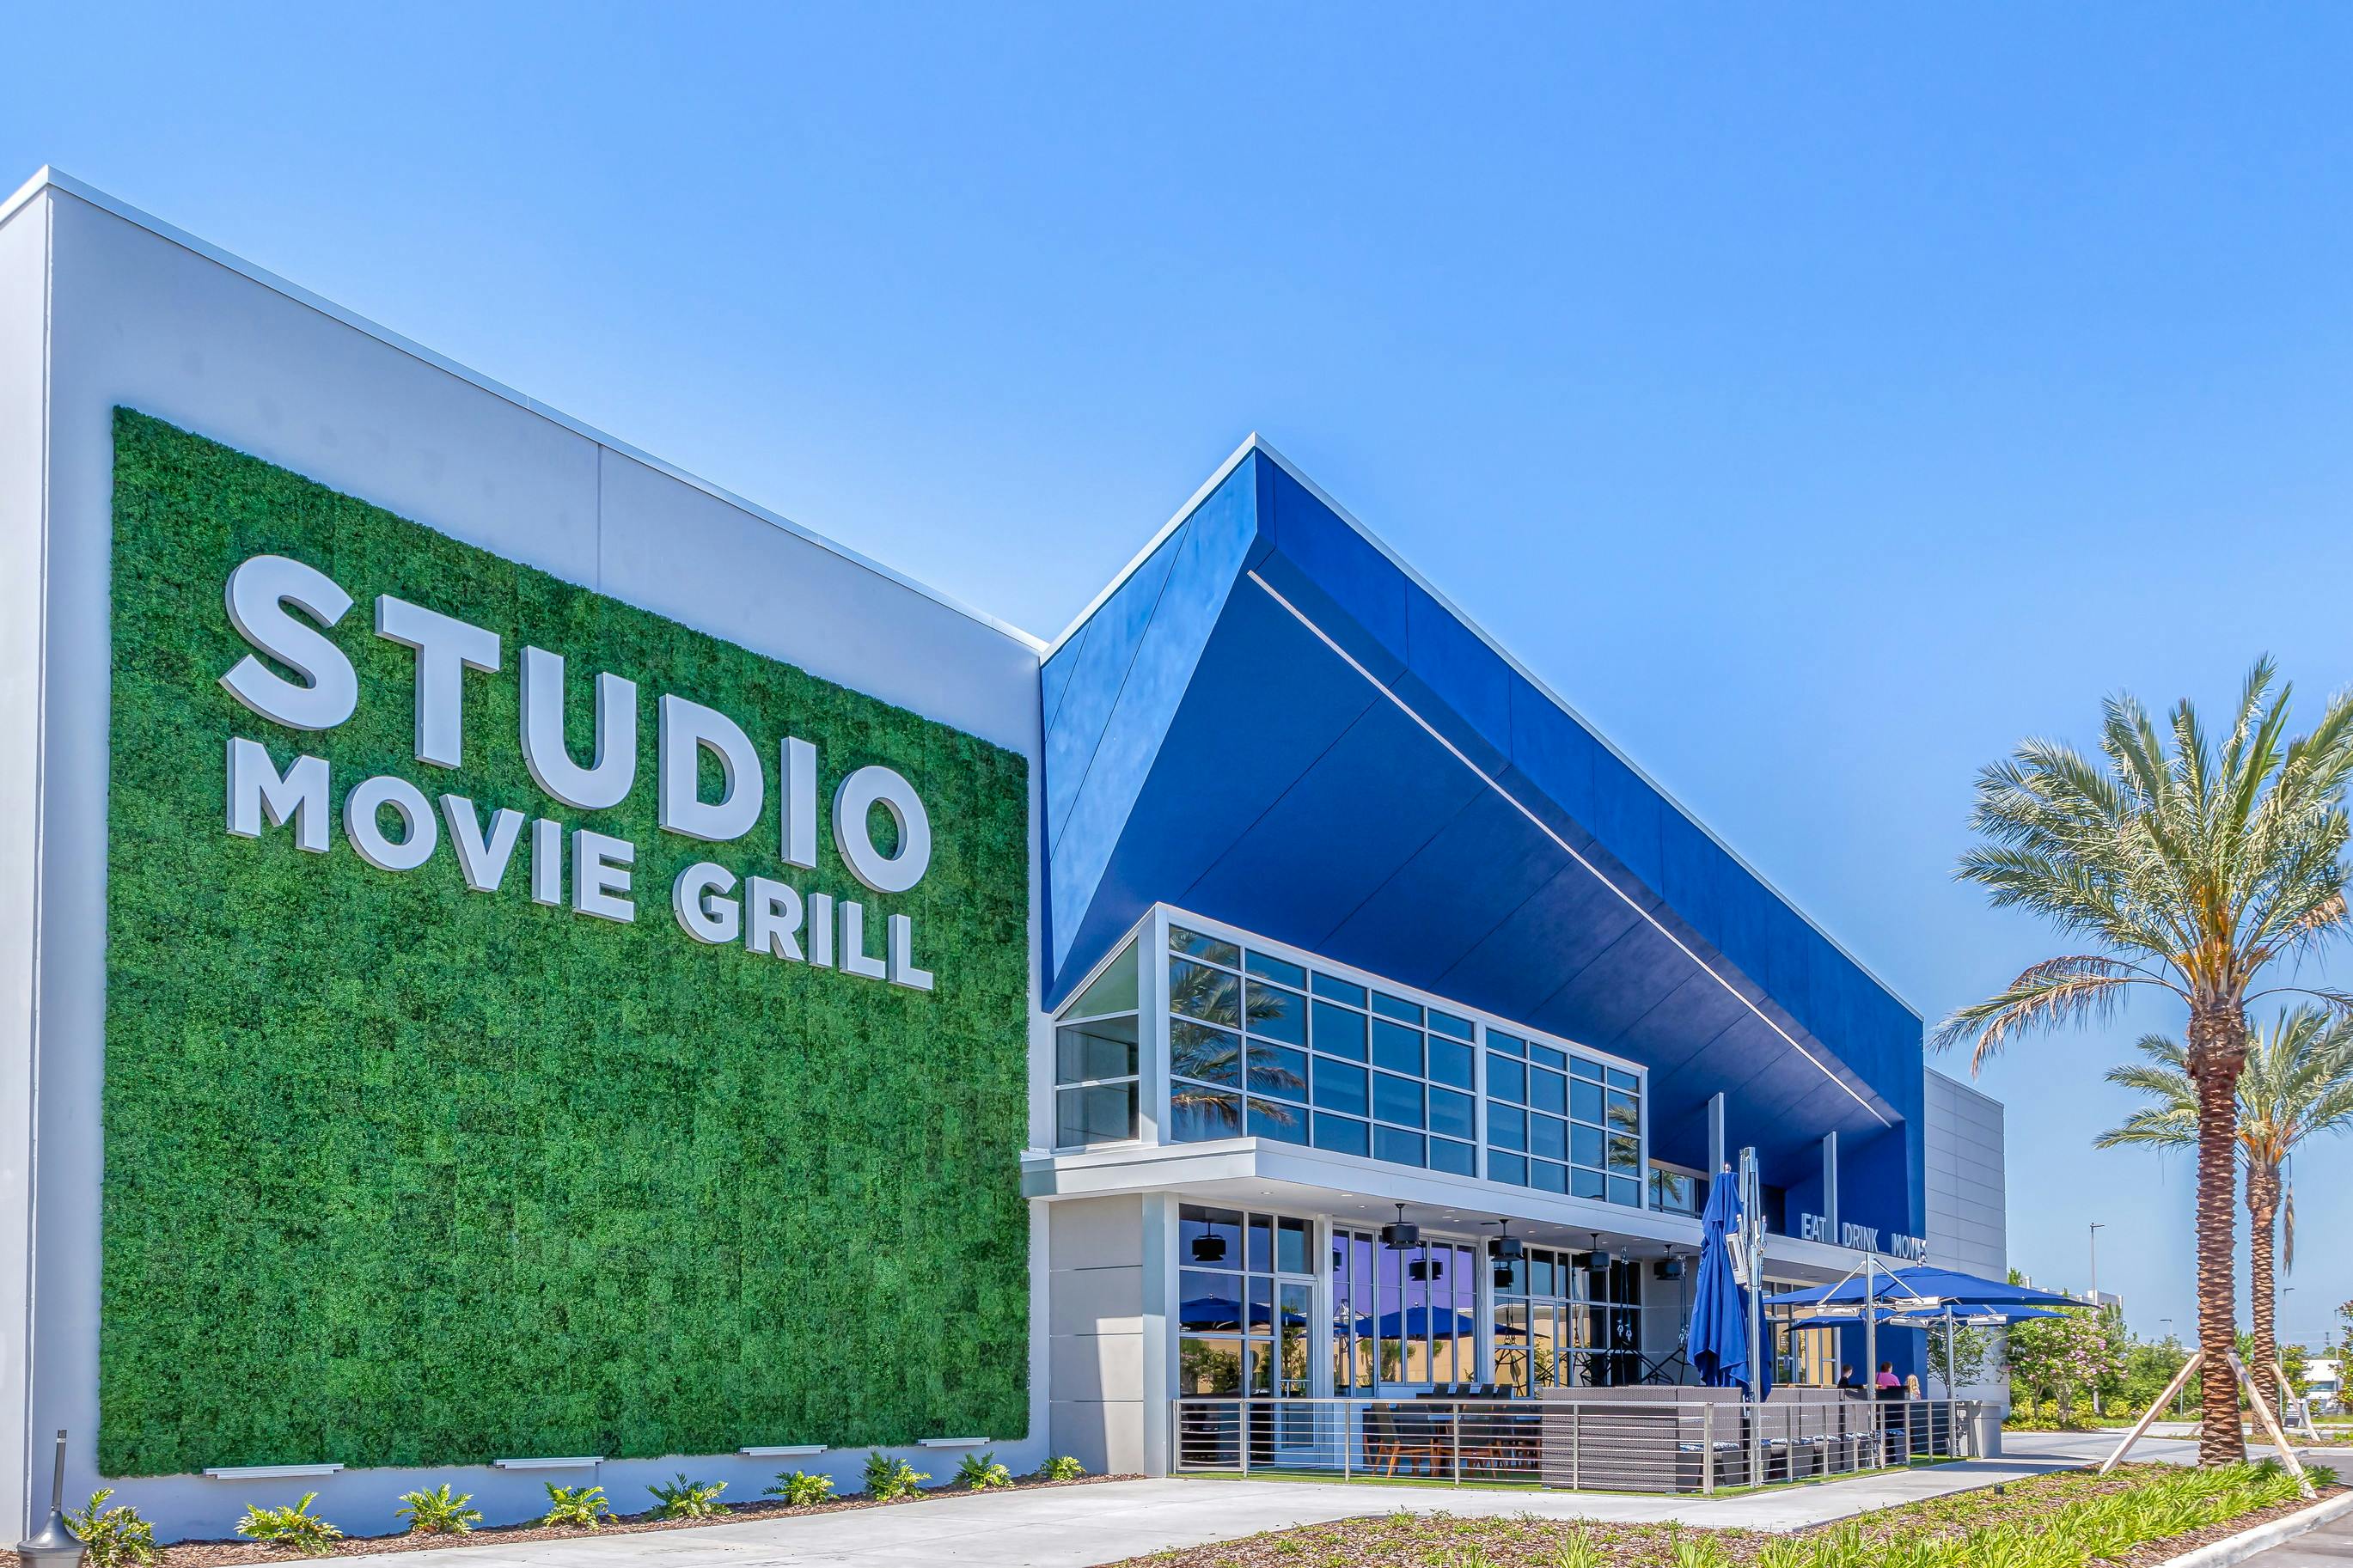 grill movies near me